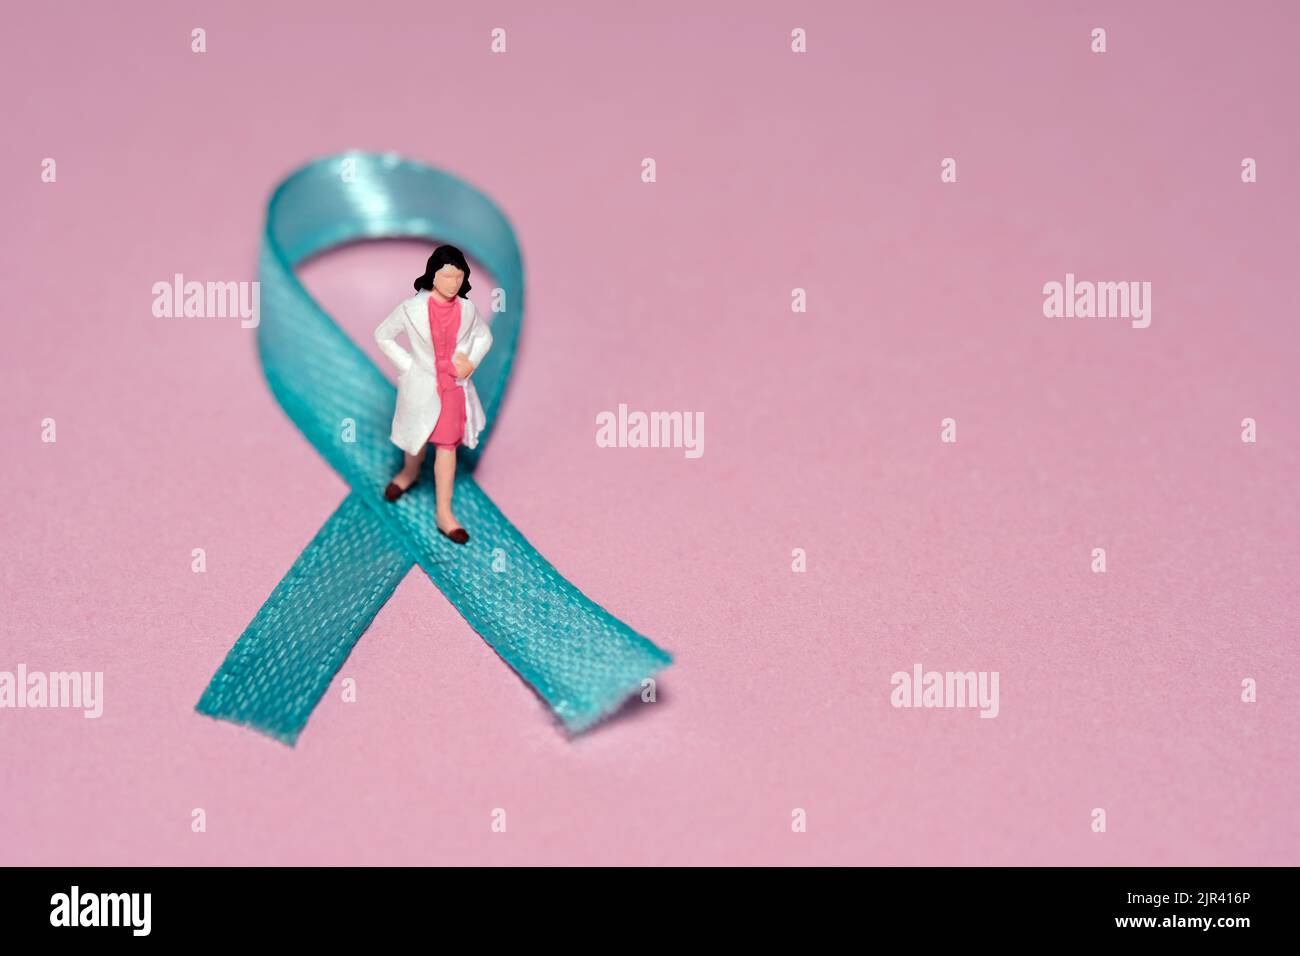 Miniature people figure toys photography. Ovarian cancer awareness day concept. Girl woman doctor standing above green turquoise teal ribbon. Image ph Stock Photo